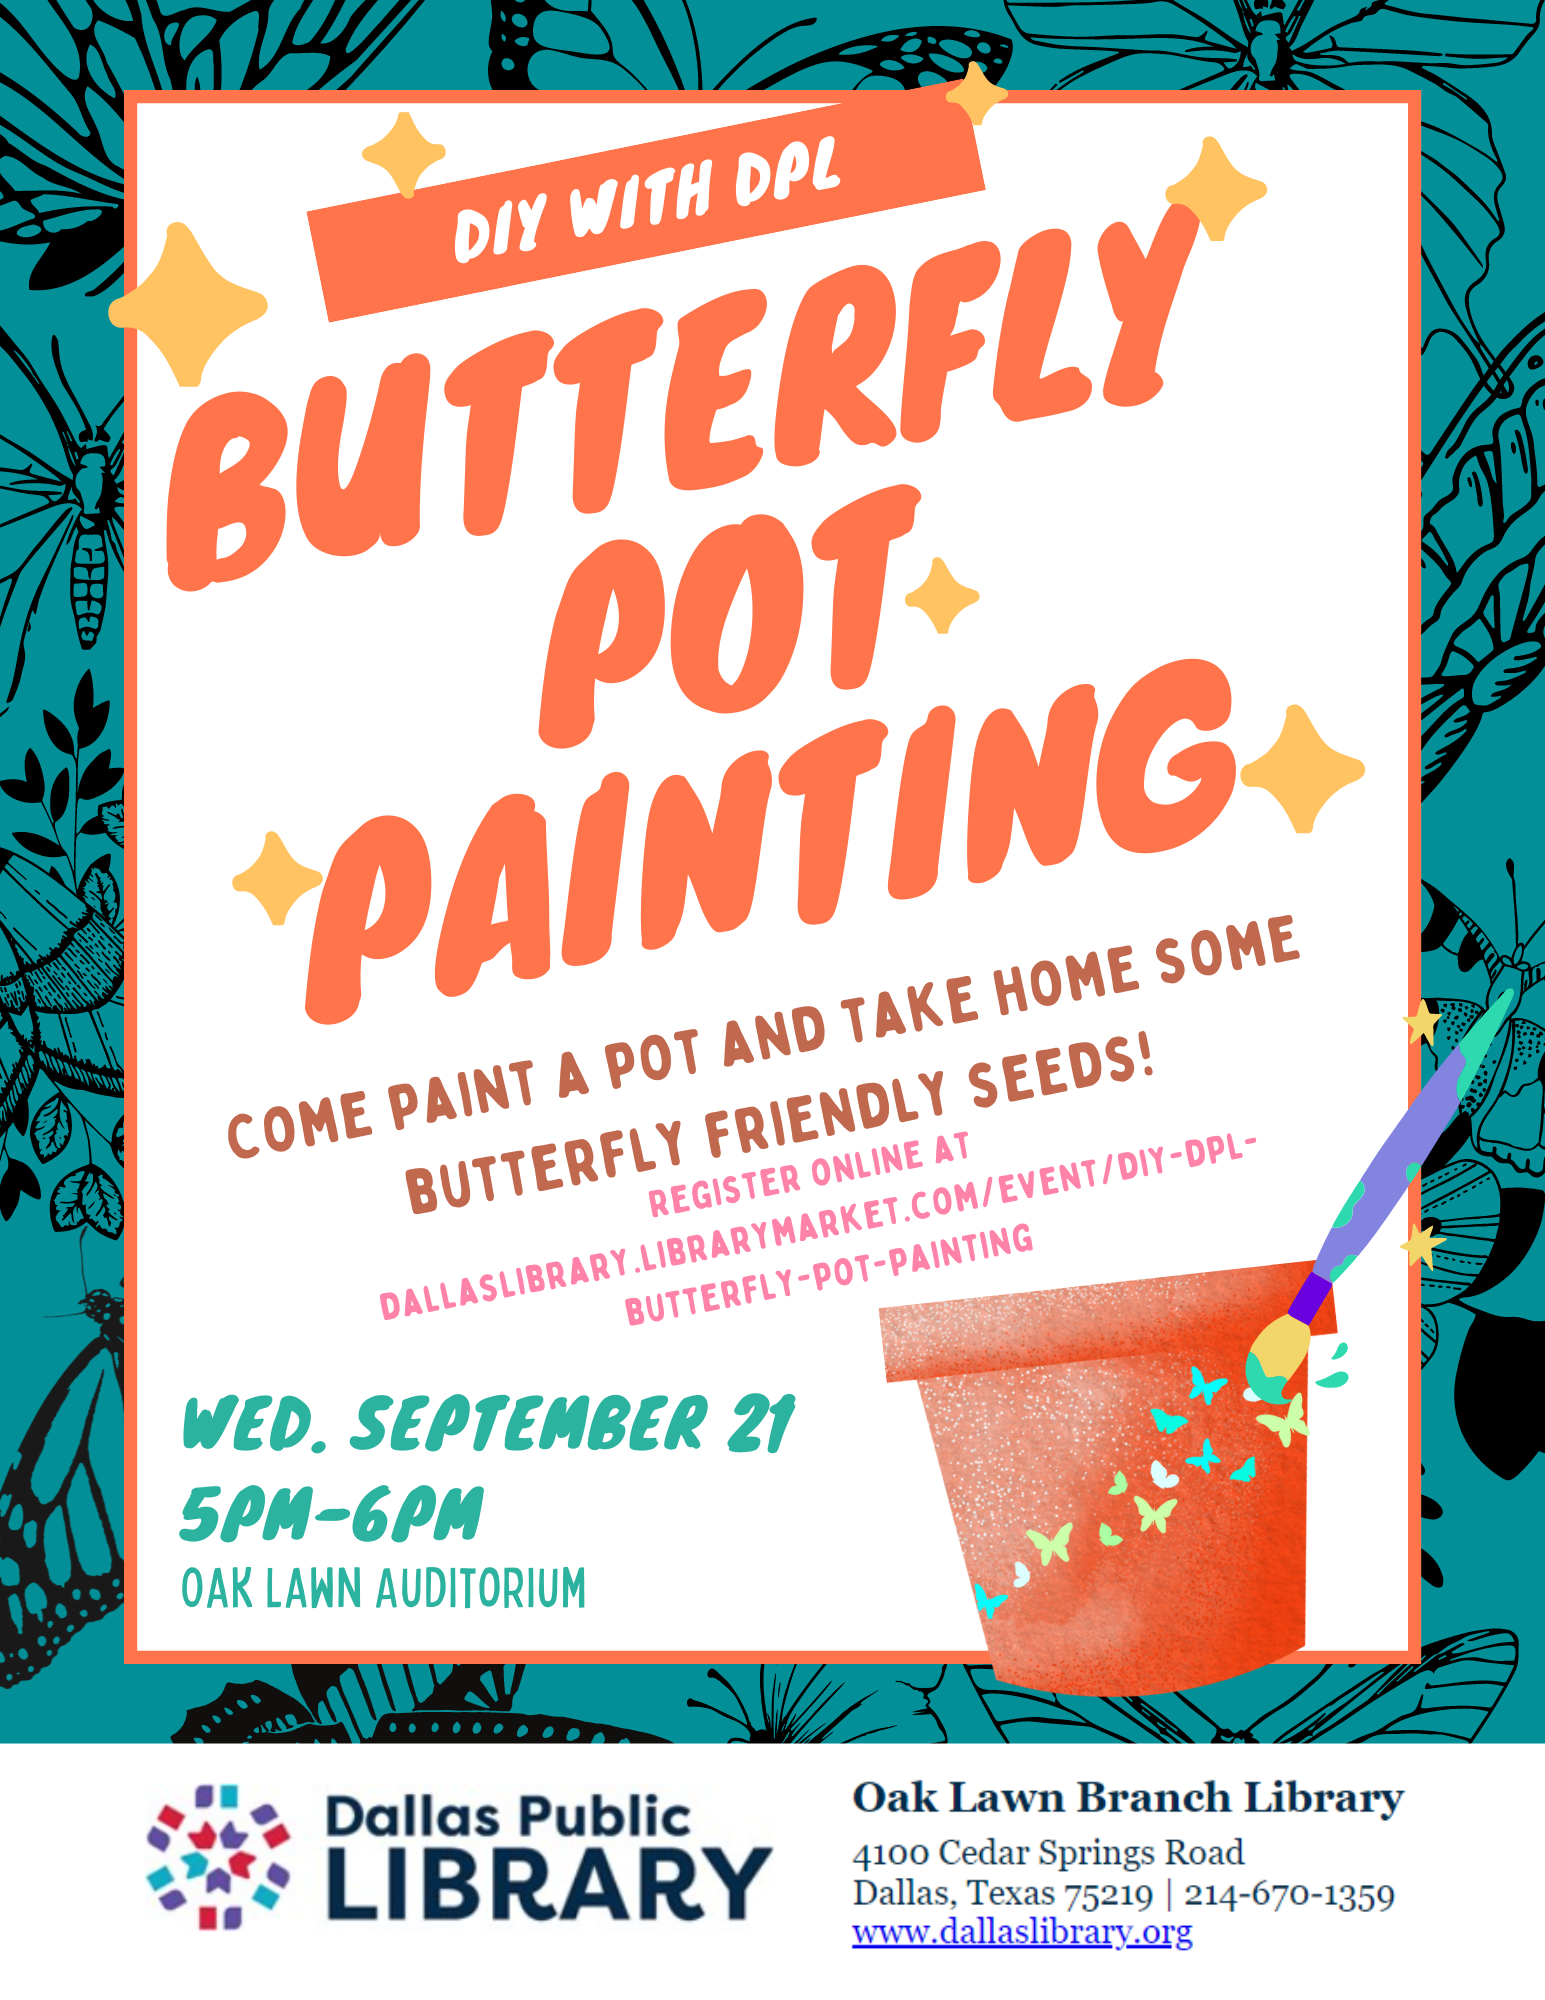 A flyer that states "DIY with DPL: Butterfly Pot Painting; Come paint a pot and take home some butterfly friendly seeds! Wed. September 21, 5-6PM, Oak Lawn Auditorium." There is a small orange pot with a brush painting some butterflies on it.